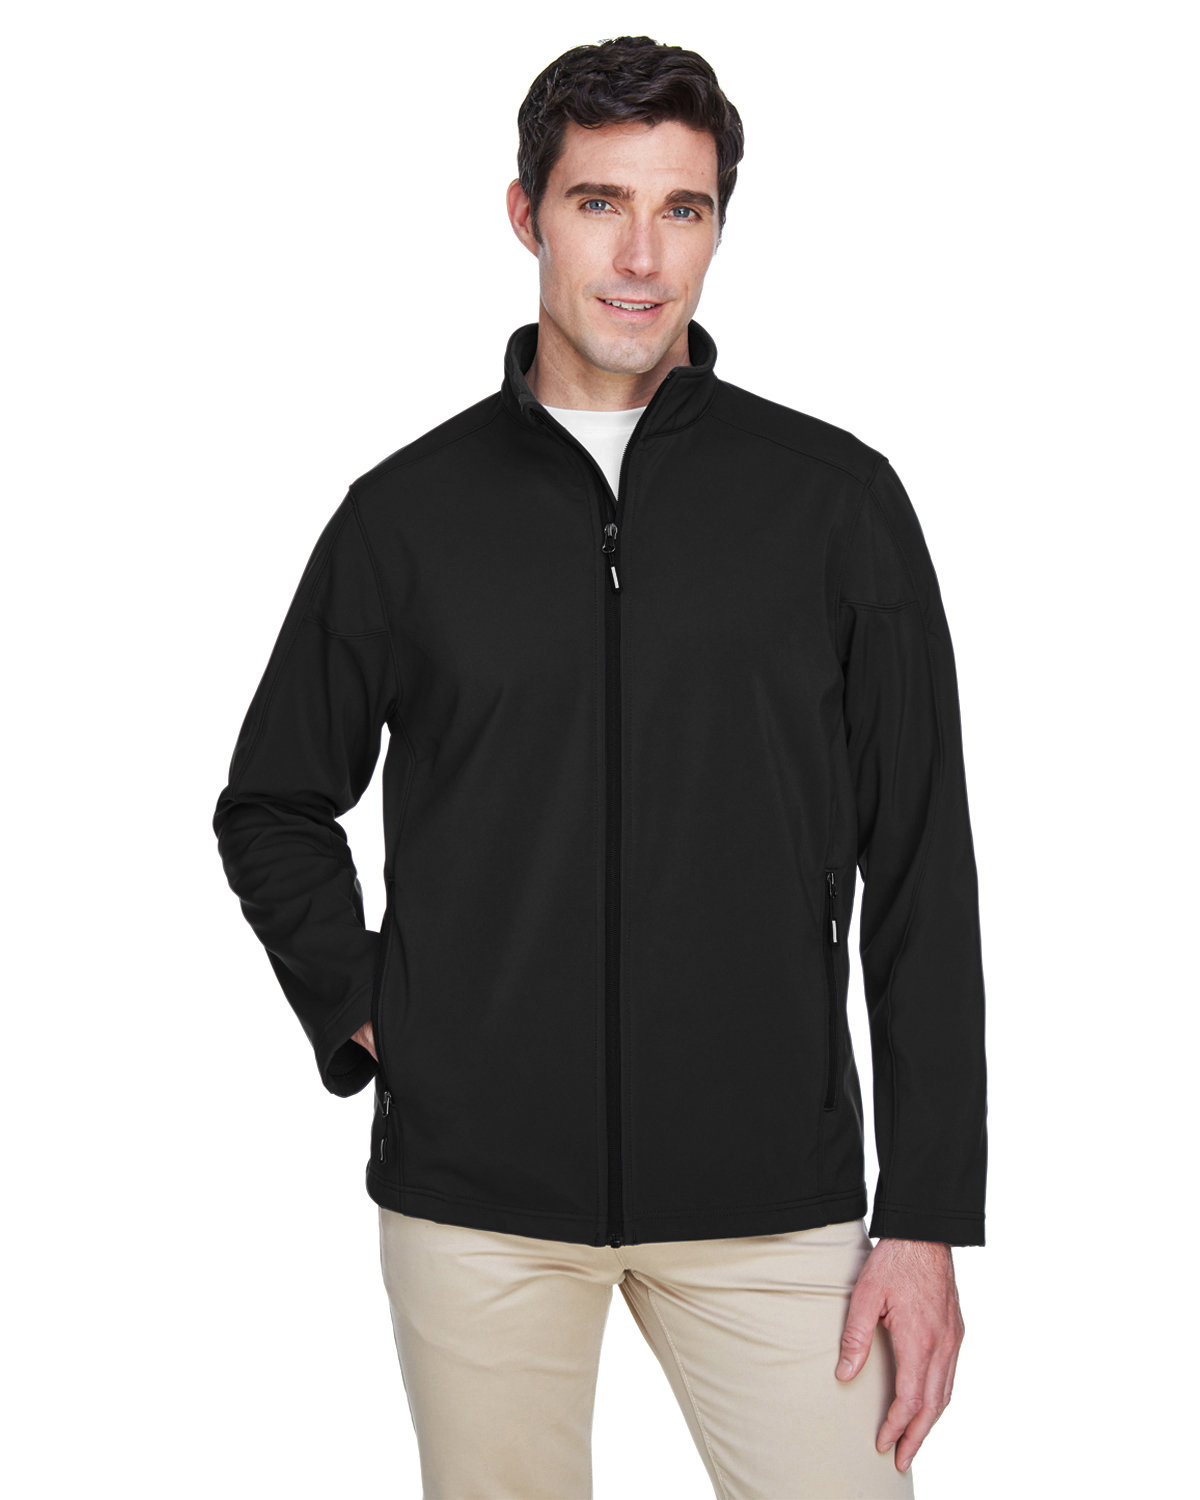 Core 365 Men's Tall Cruise Two-Layer Fleece Bonded Soft Shell Jacket BLACK 